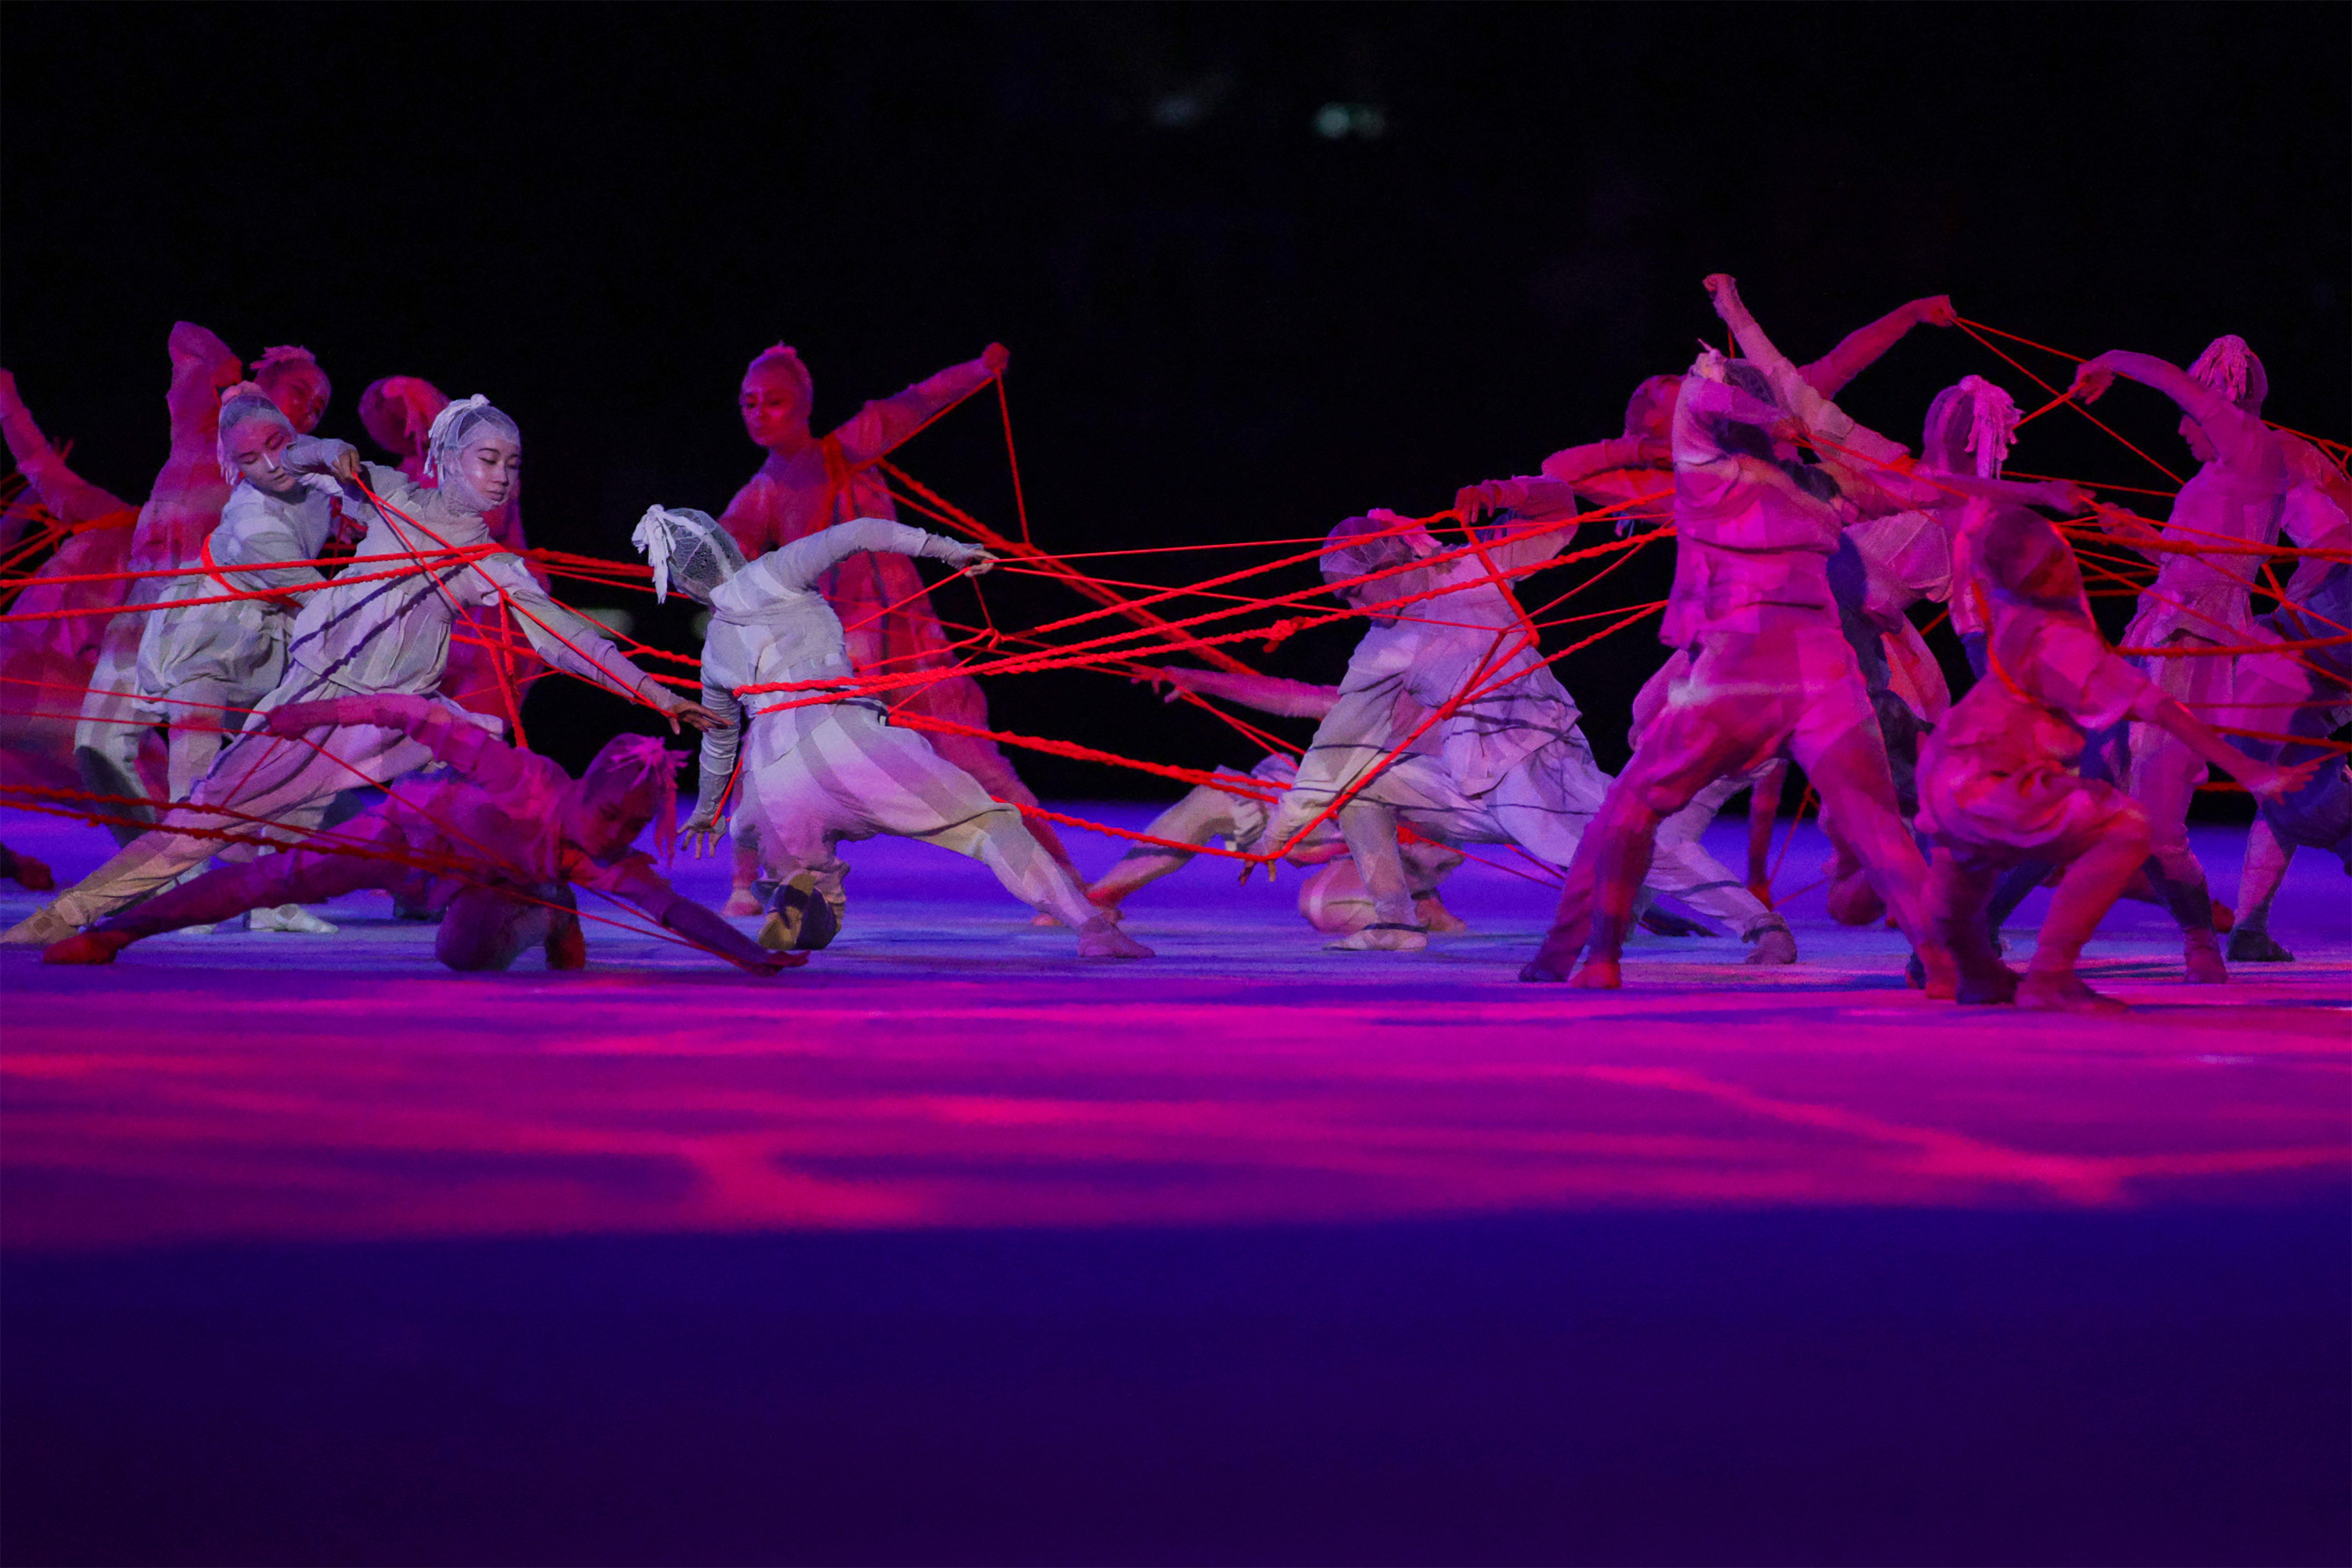 Dancers perform during the opening ceremony of the Tokyo 2020 Olympic Games, at the Olympic Stadium in Tokyo, on July 23, 2021. (Photo by HANNAH MCKAY / POOL / AFP)